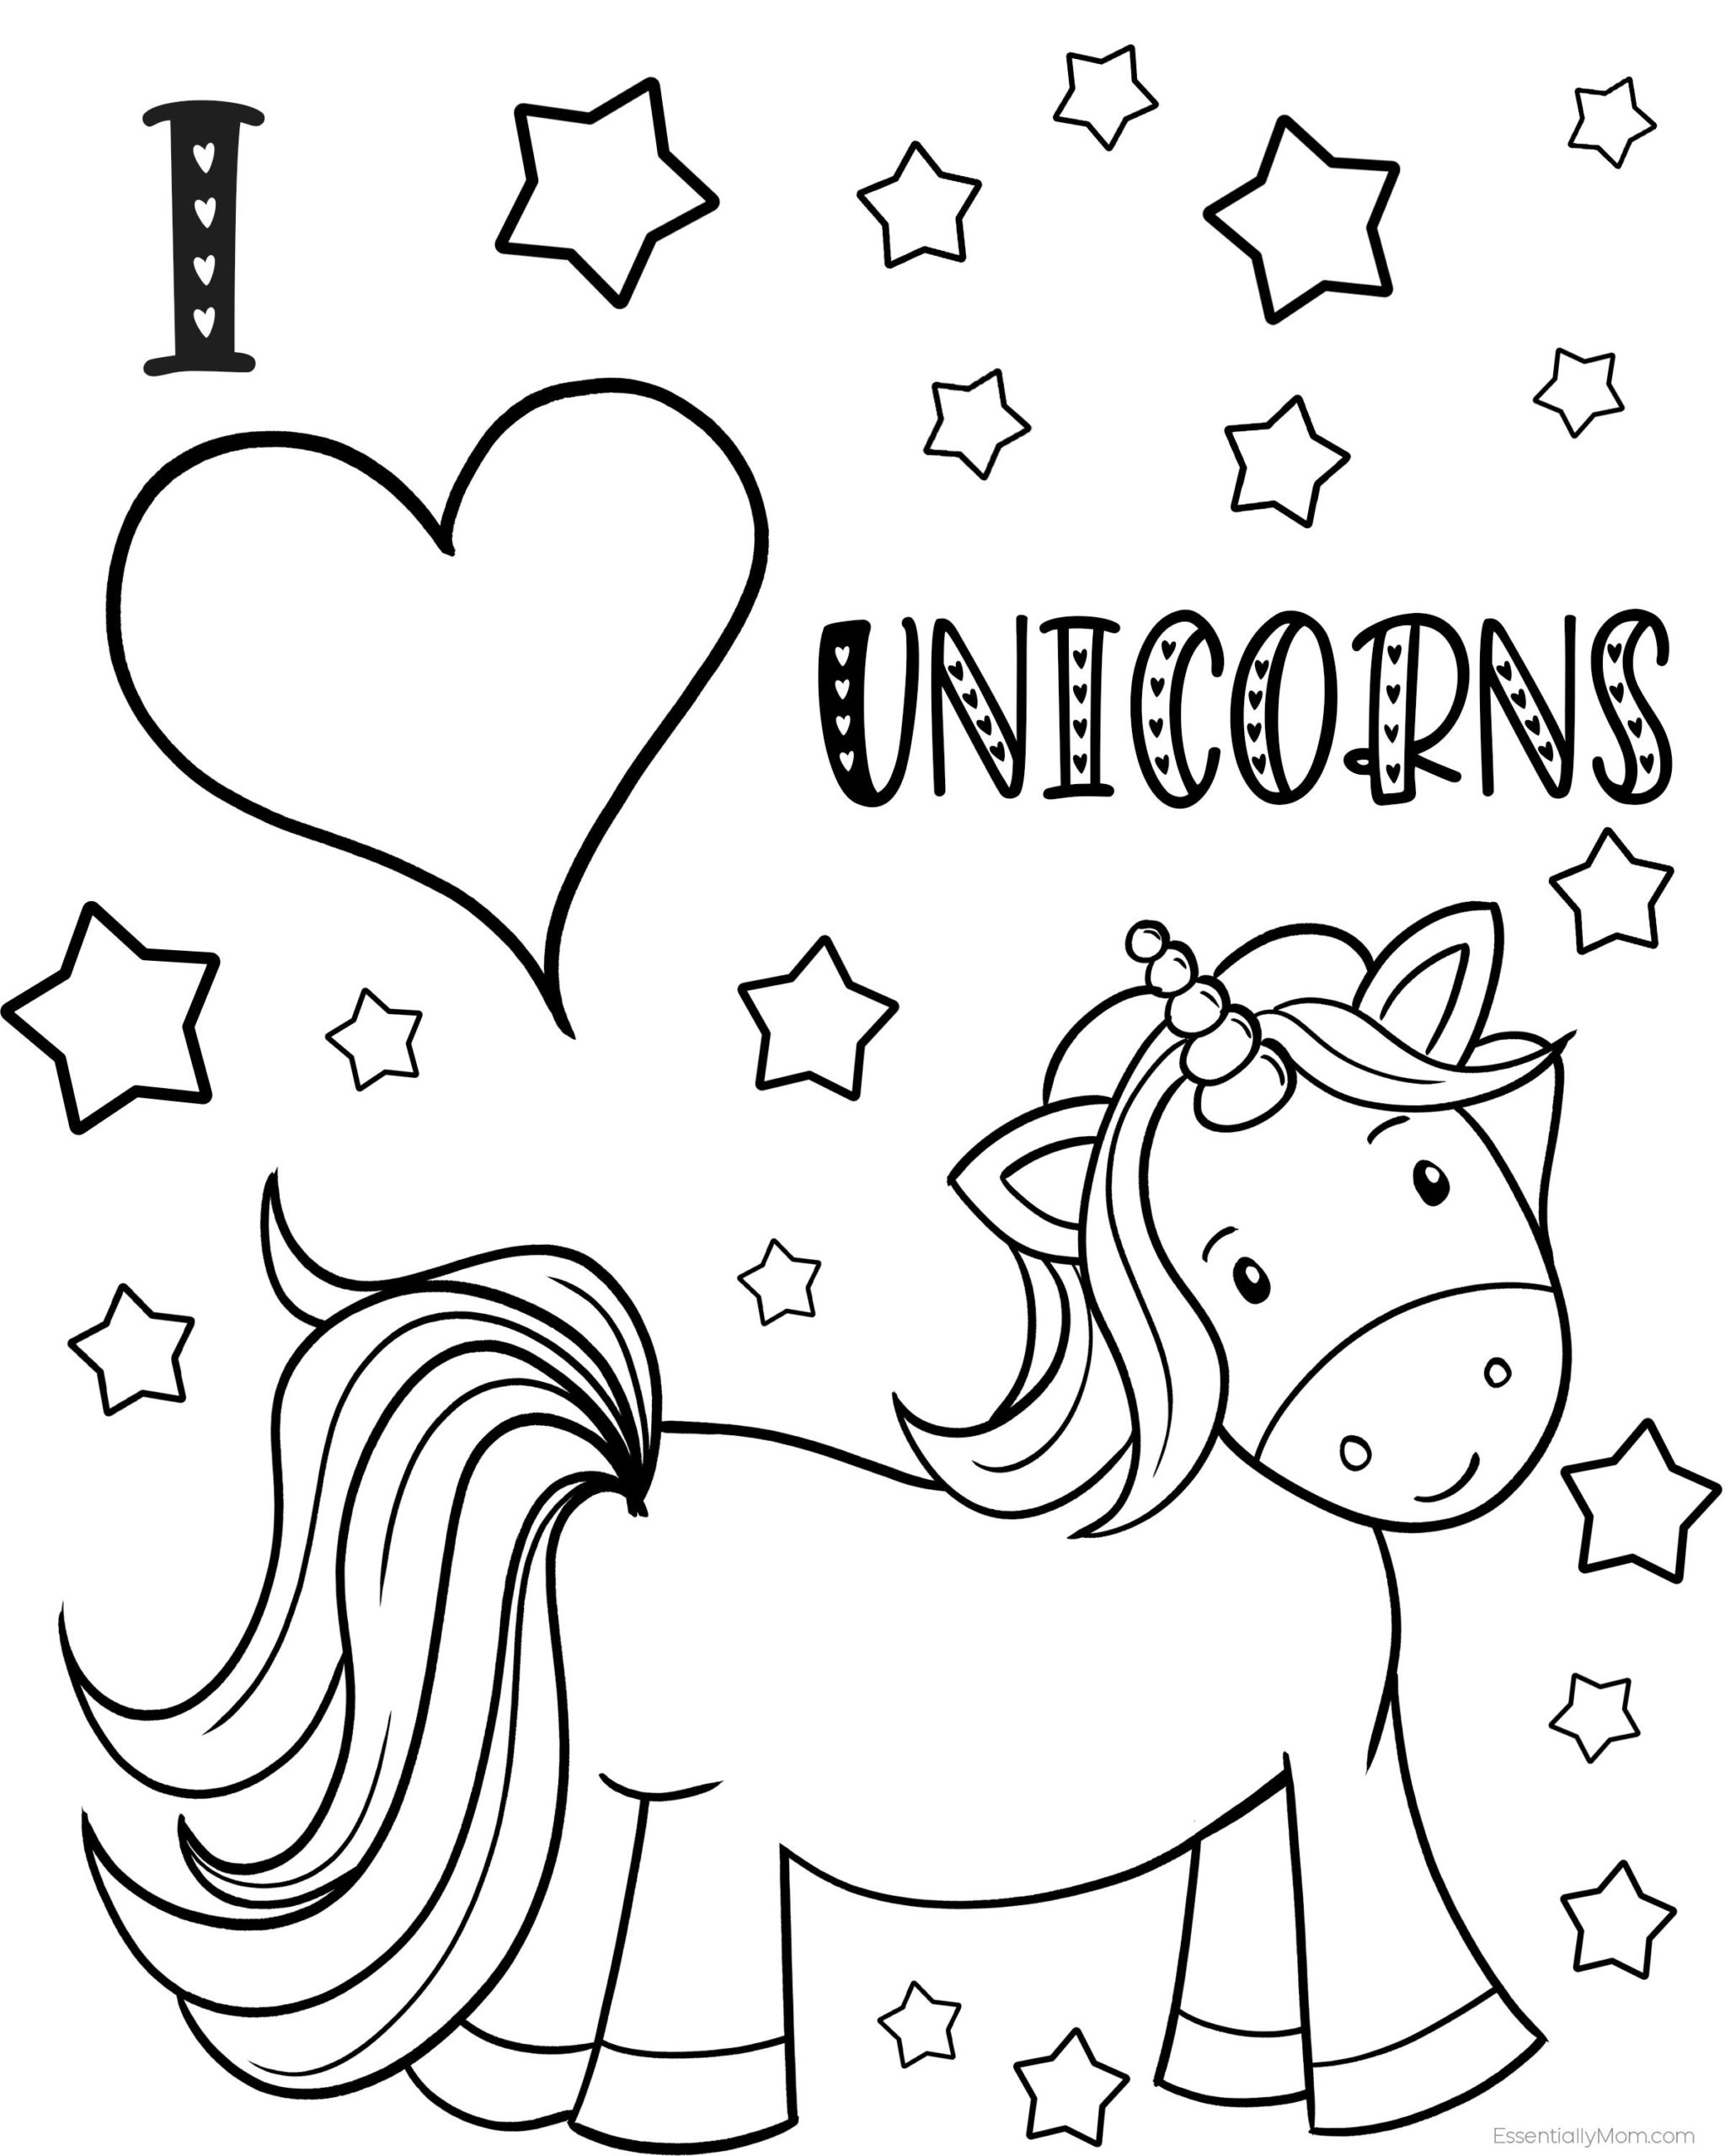 Unicorn Coloring Pages To Download And Print For Free Unicorns Free 